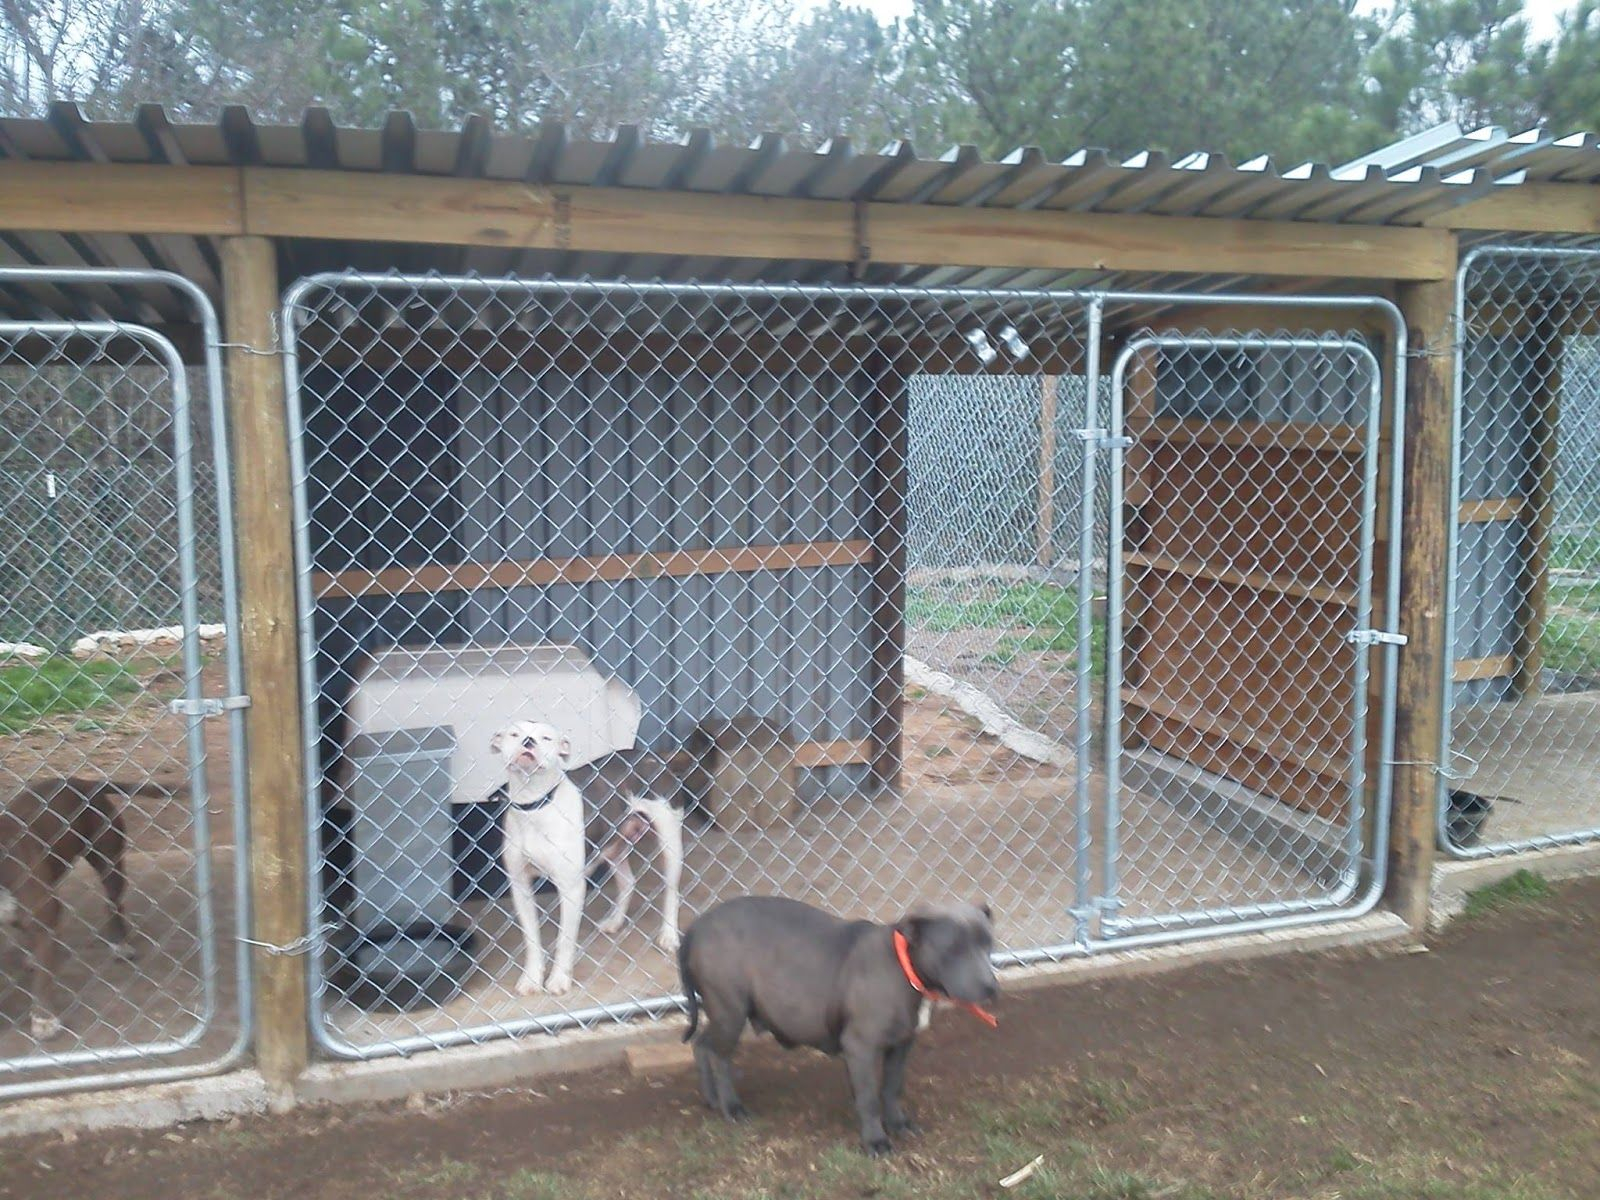 17.kennel setup with plywood in the middle to prevent fights and dogs via SIMPHOME.COM